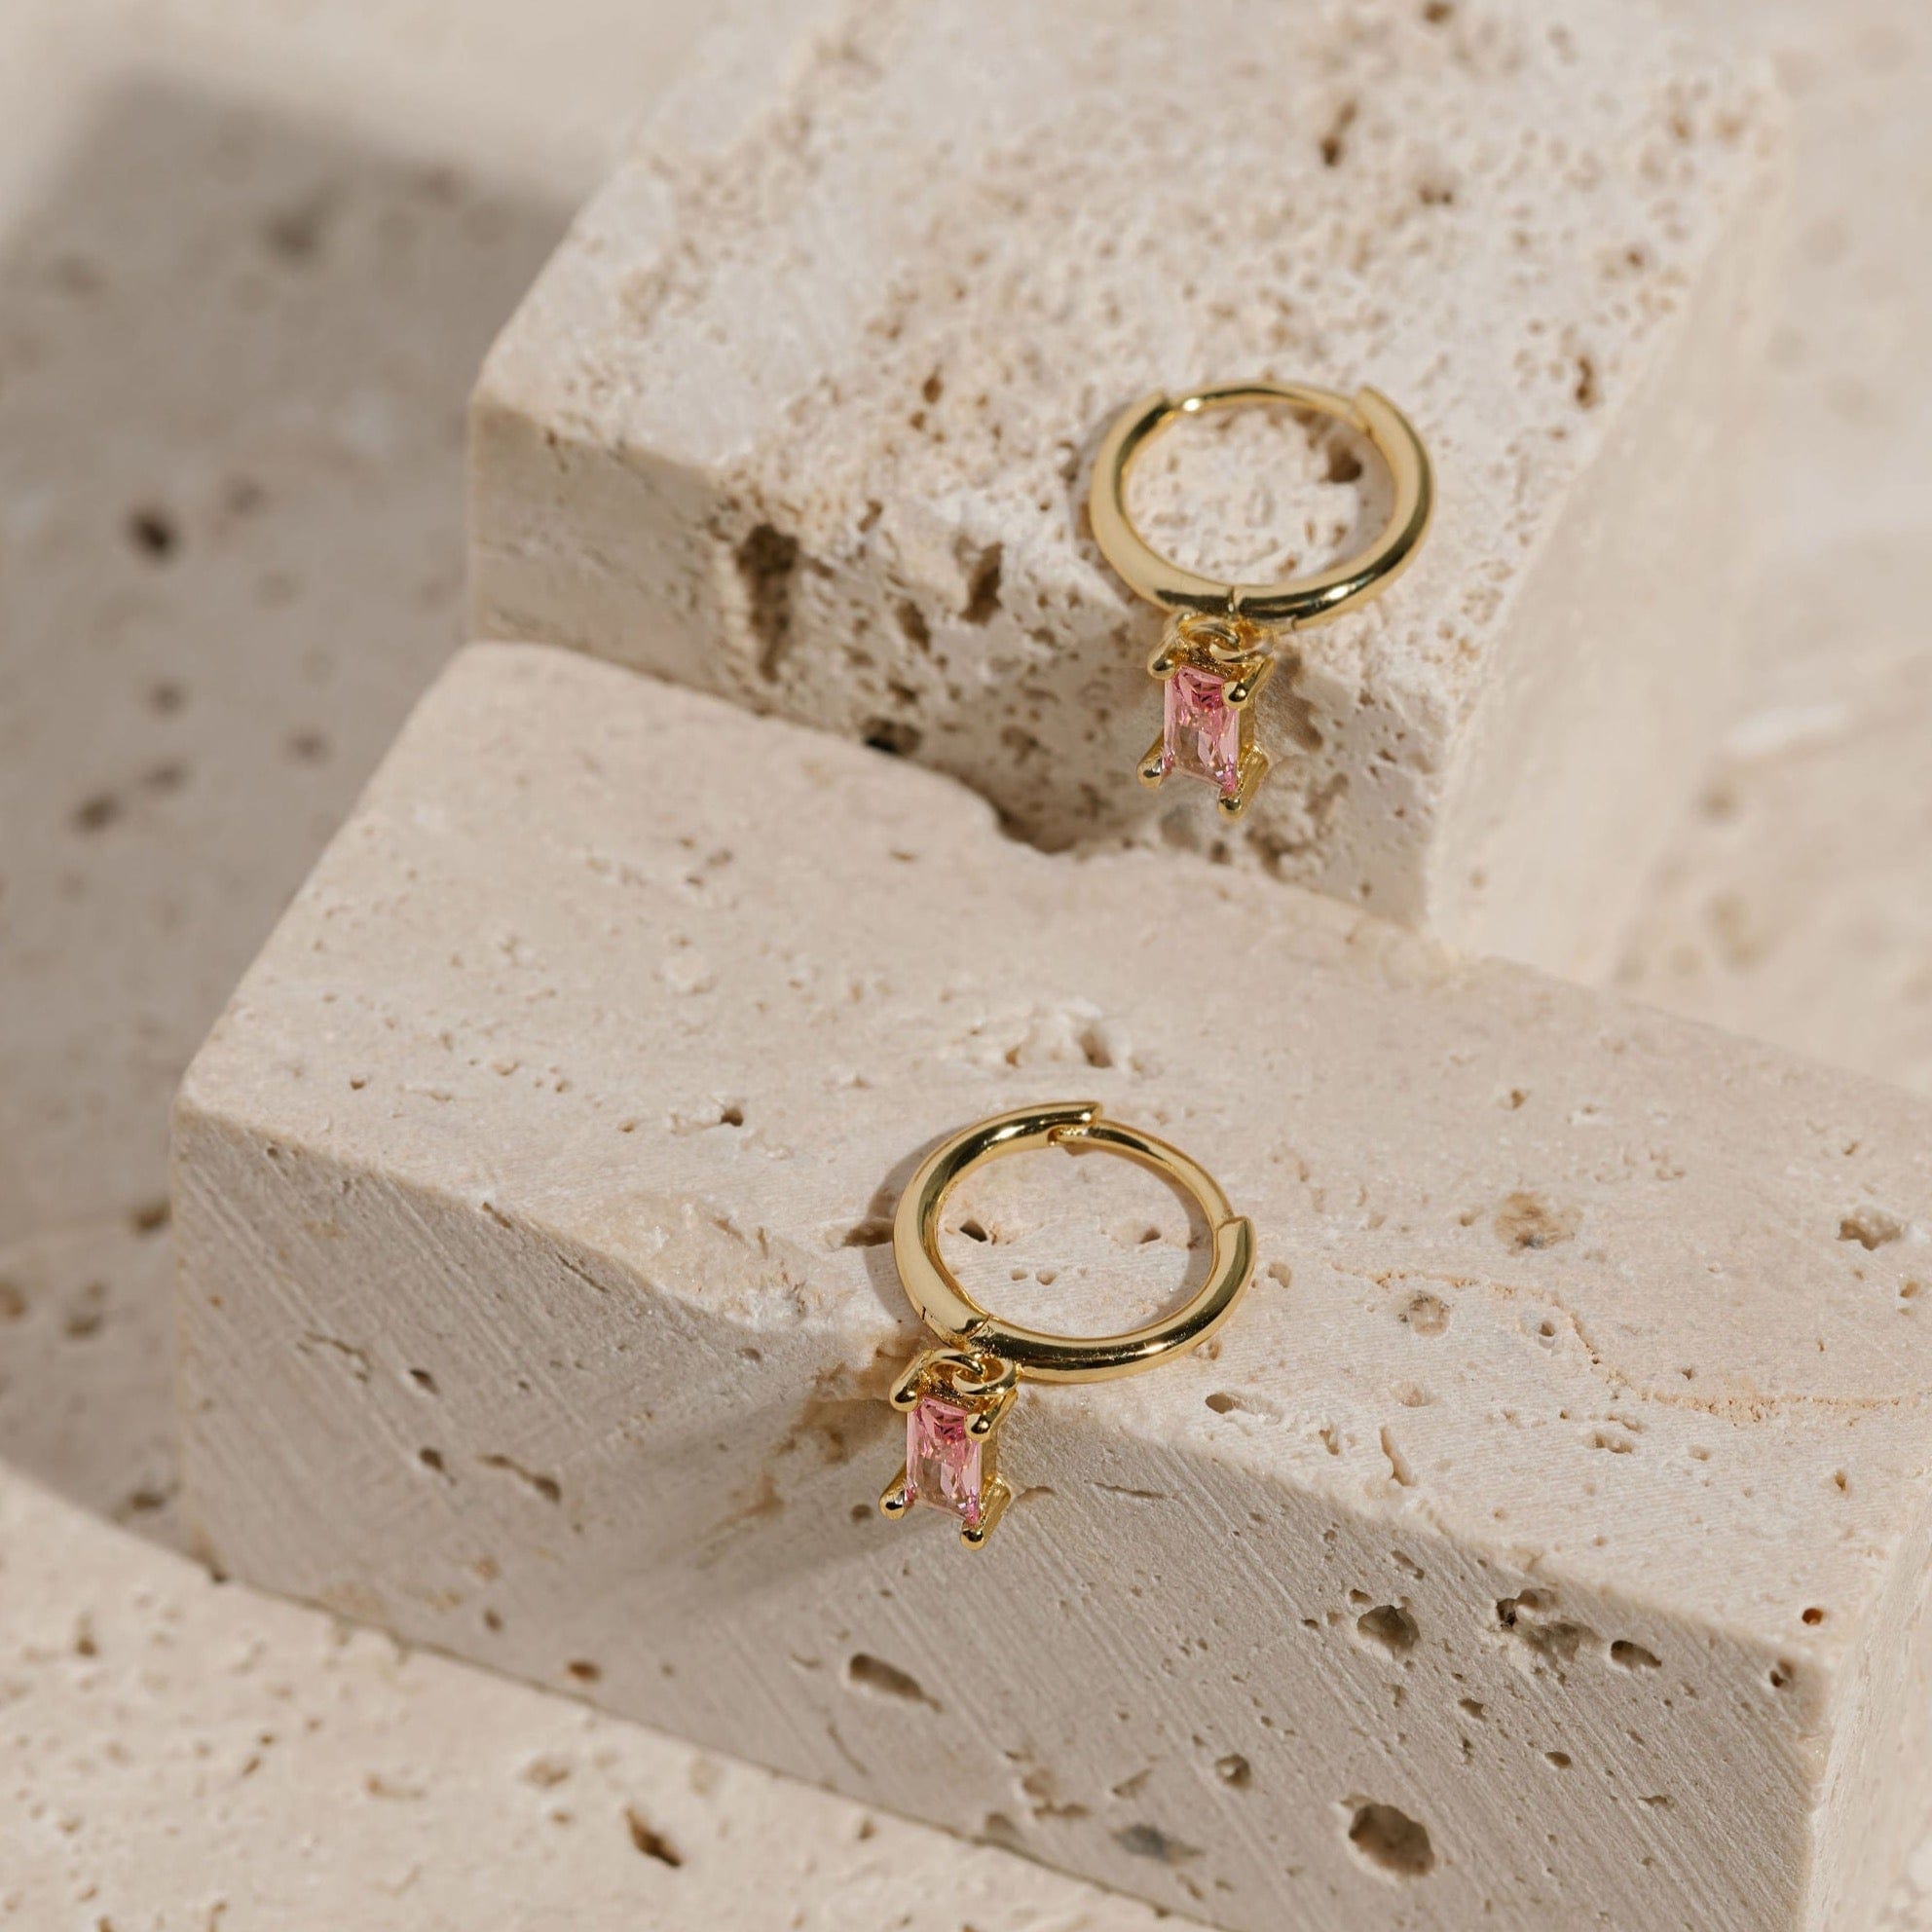 A pair of Bambina Drop Hoop earrings is displayed on two separate tiered counters, the pink crystal charm dangling down the side as the golden ring lays on top.